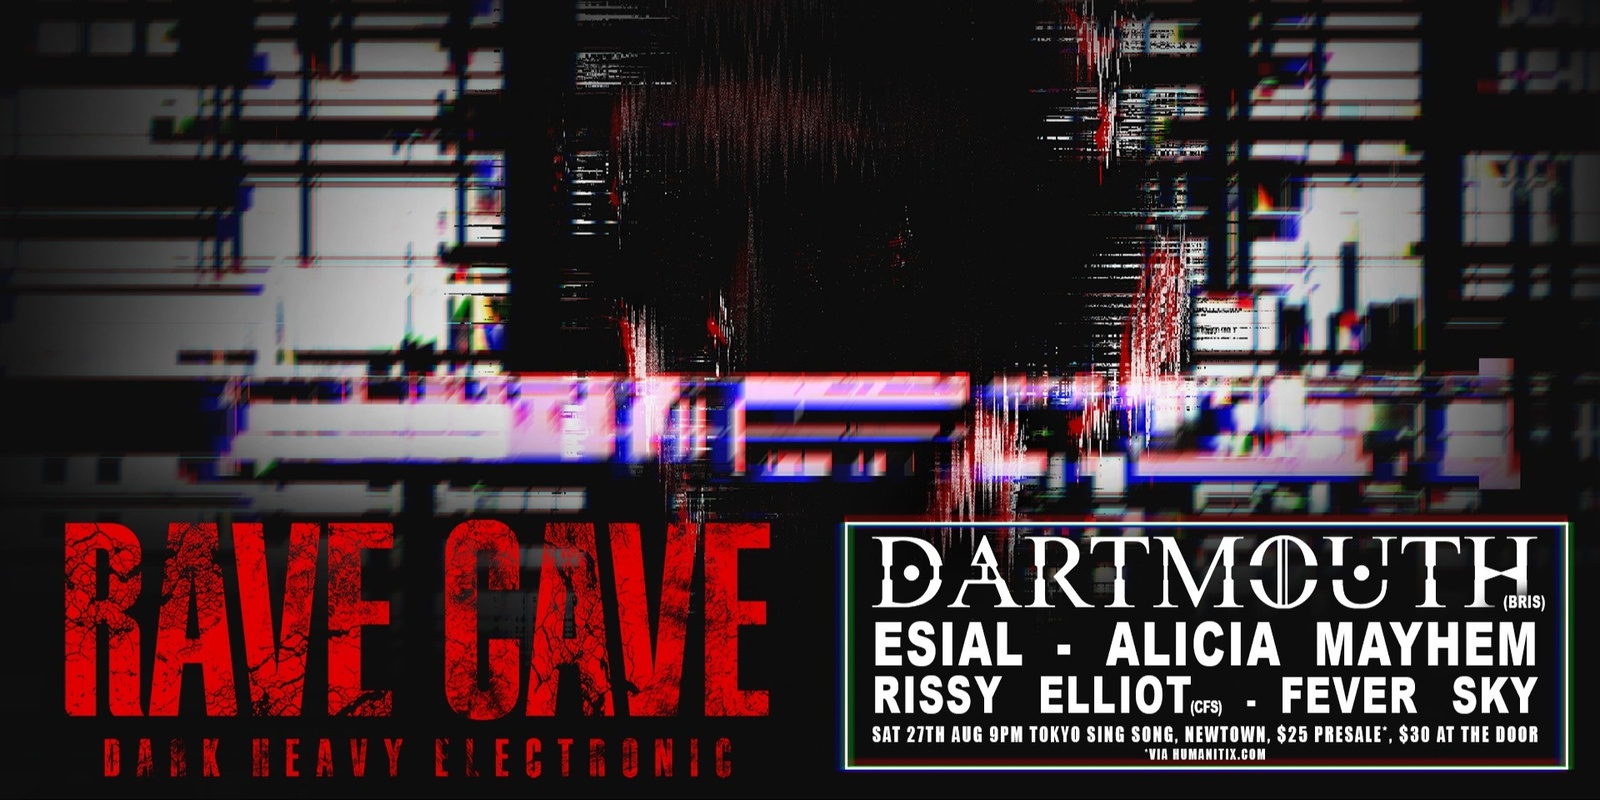 Banner image for RAVE CAVE XII